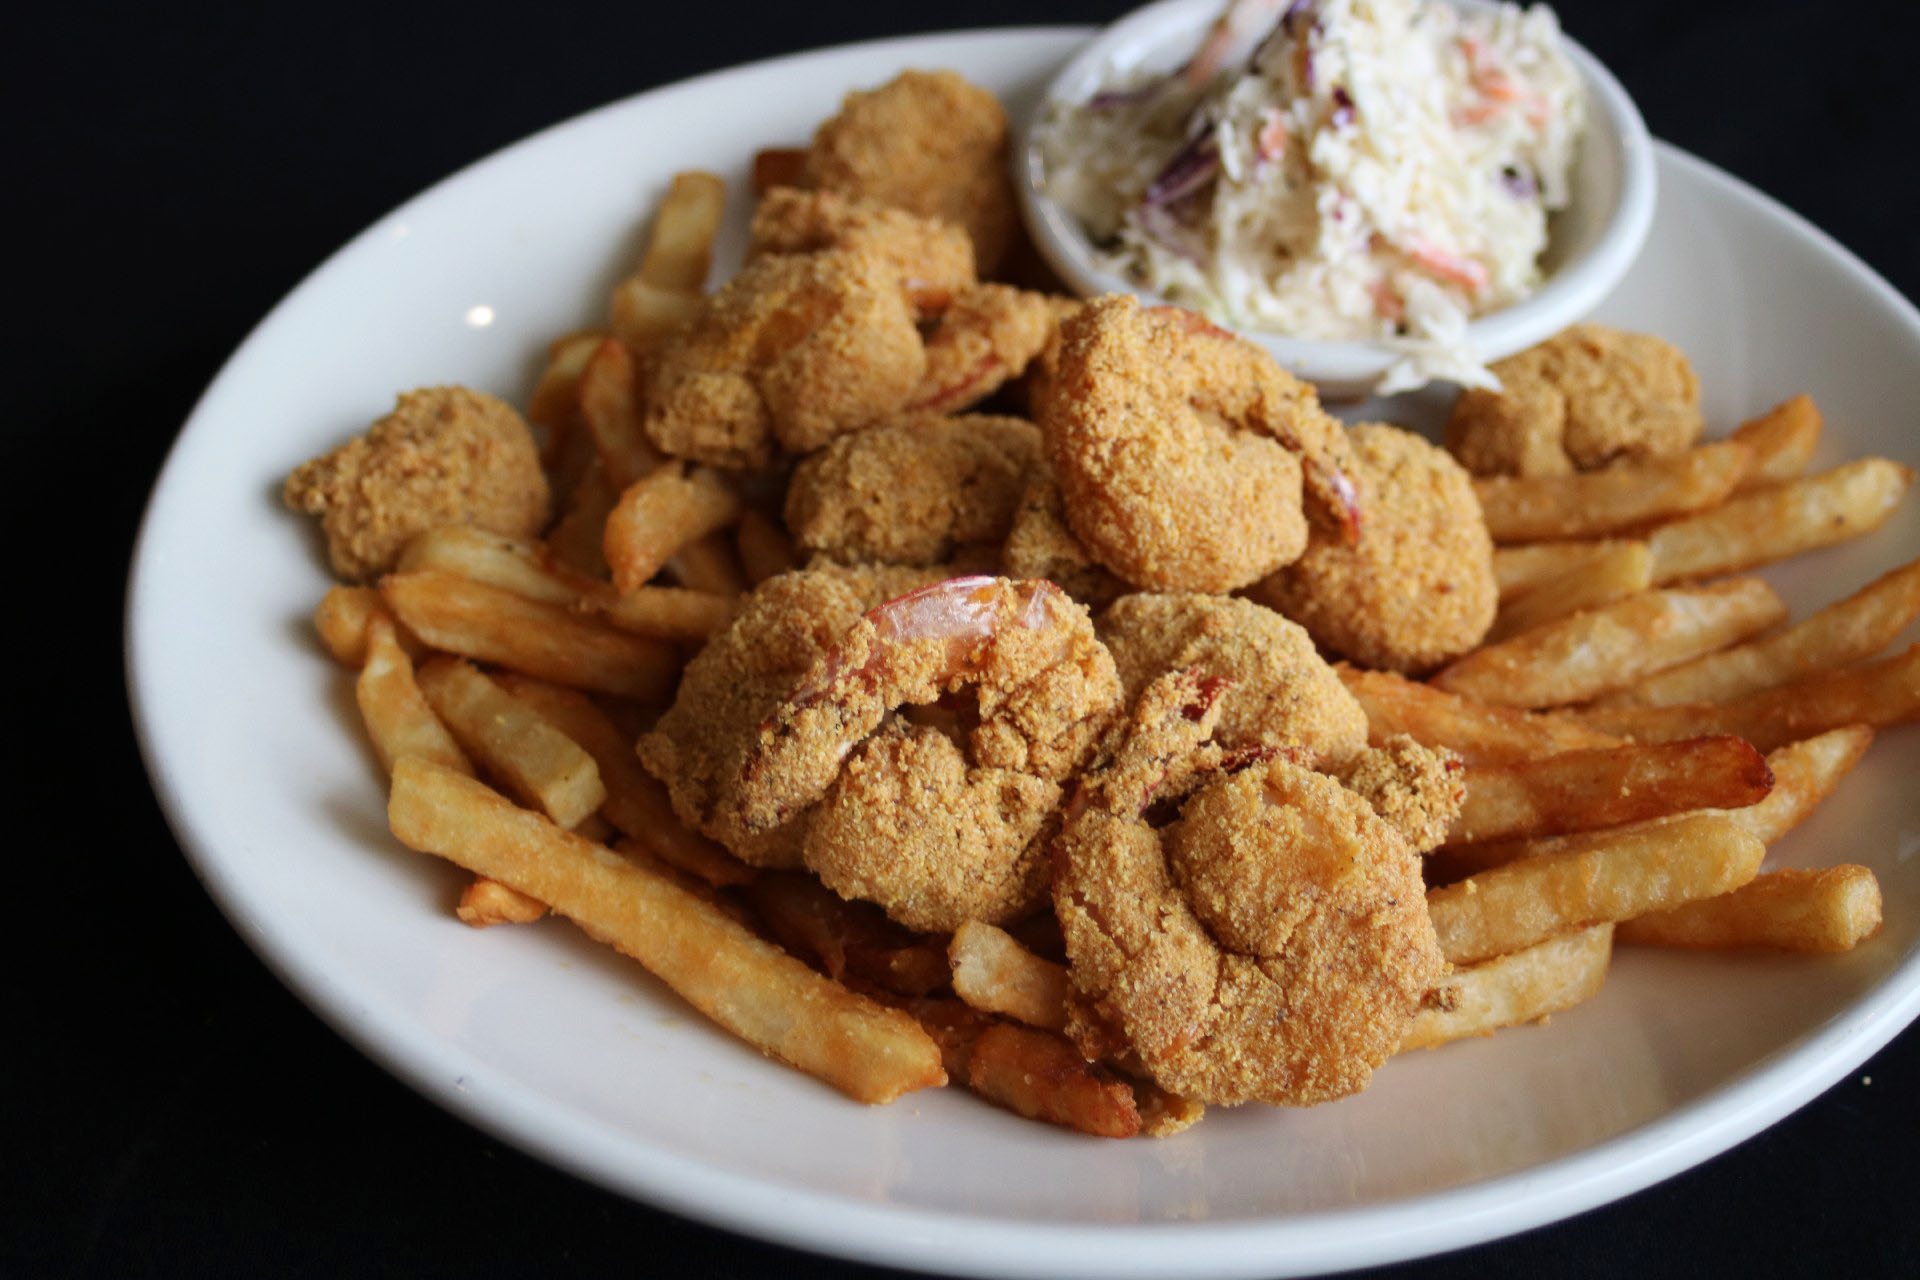 fried shimp and fries